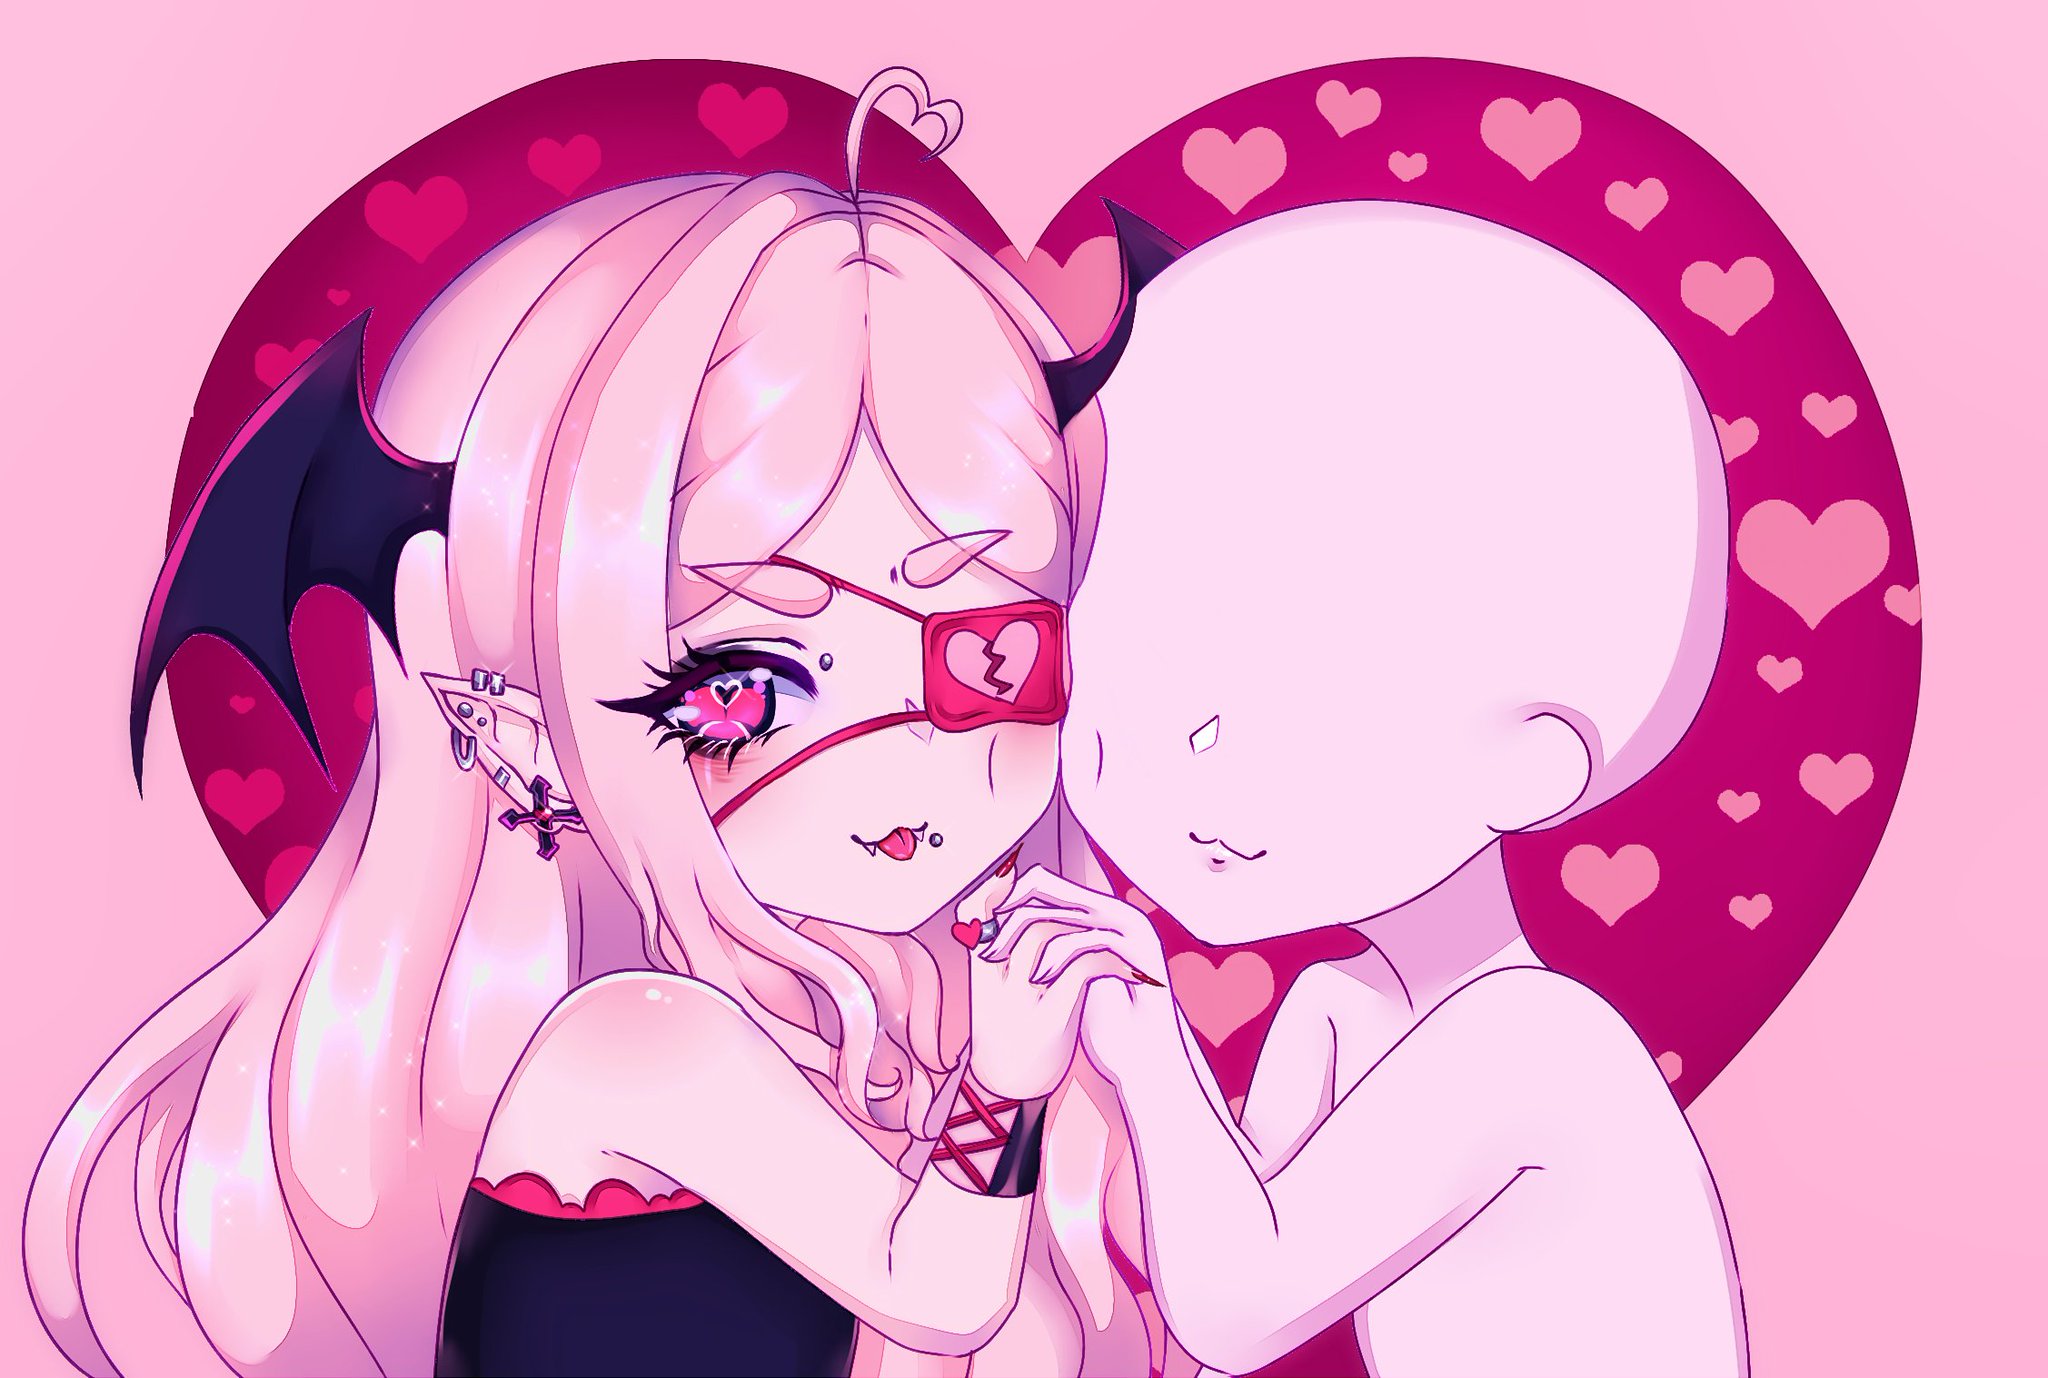 So I can draw us together squishing cheeeeks~❤️ 🩸I want all your squishies...